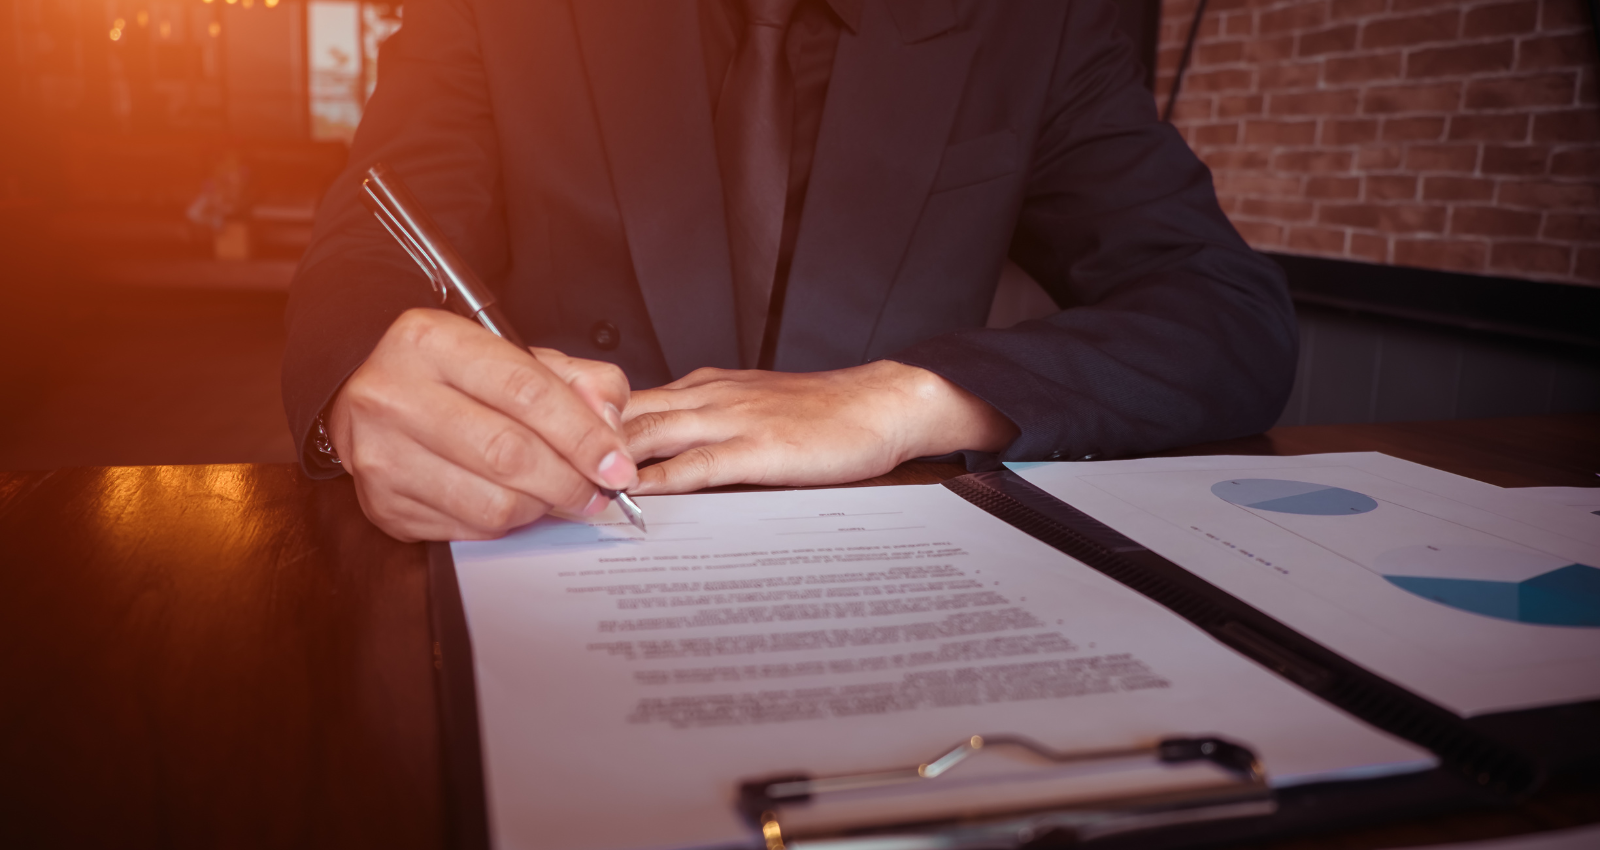 Understanding the Role of a Real Estate Lawyer